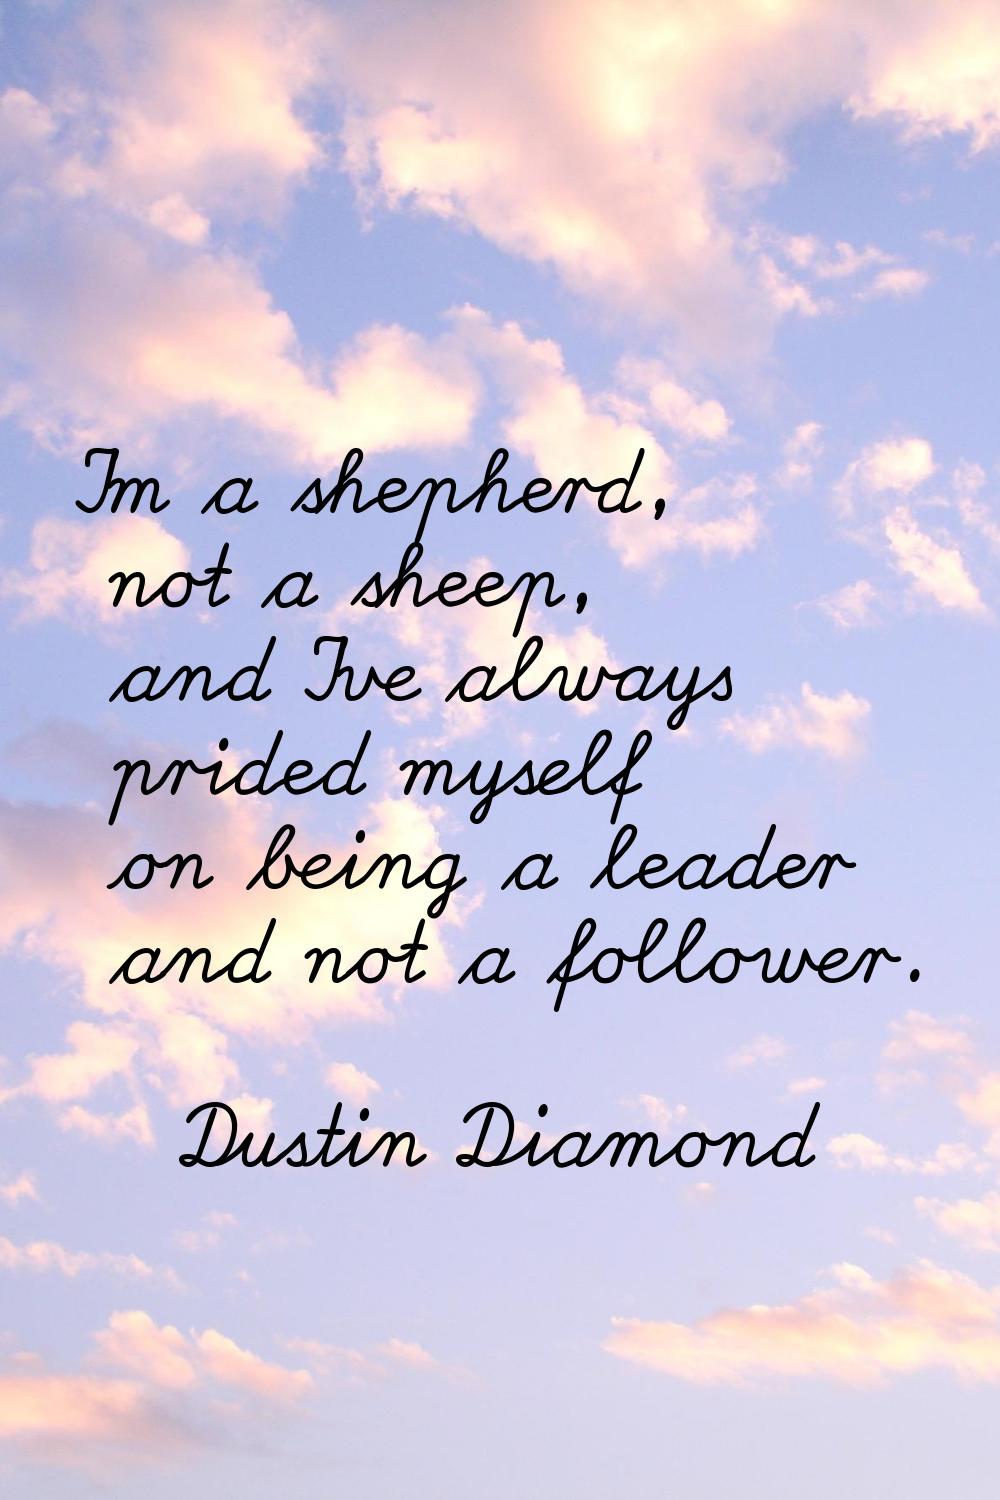 I'm a shepherd, not a sheep, and I've always prided myself on being a leader and not a follower.